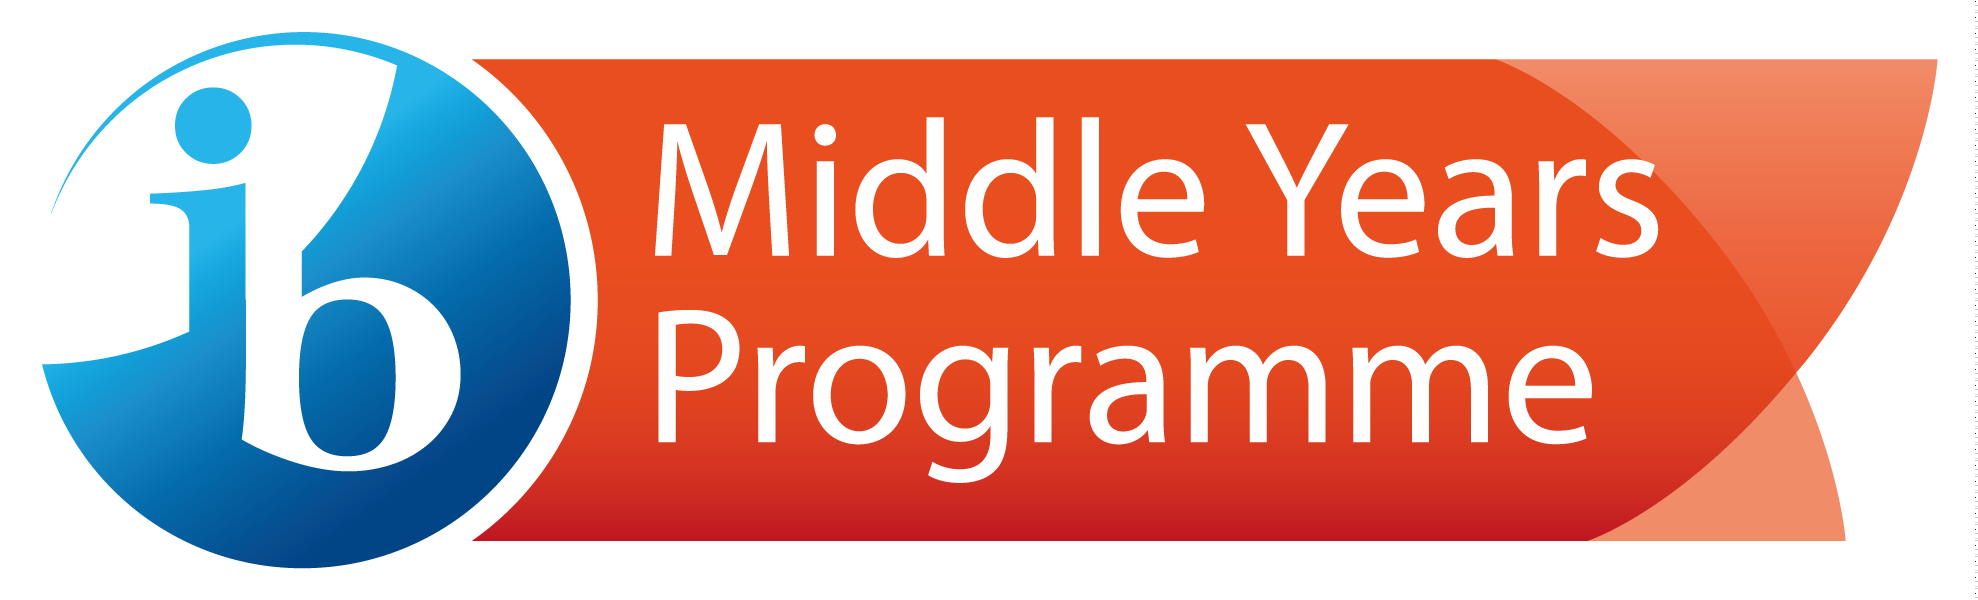 Middle Years Programme logo